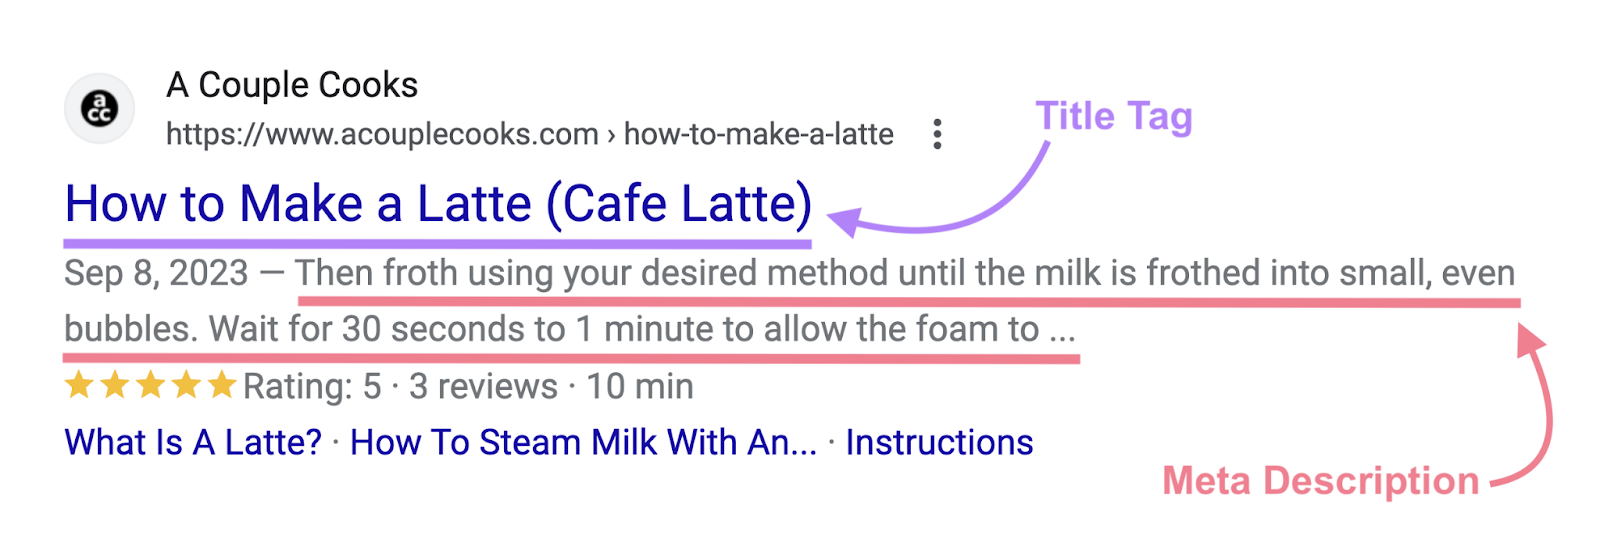 Title tag and meta description shown on Google's SERP